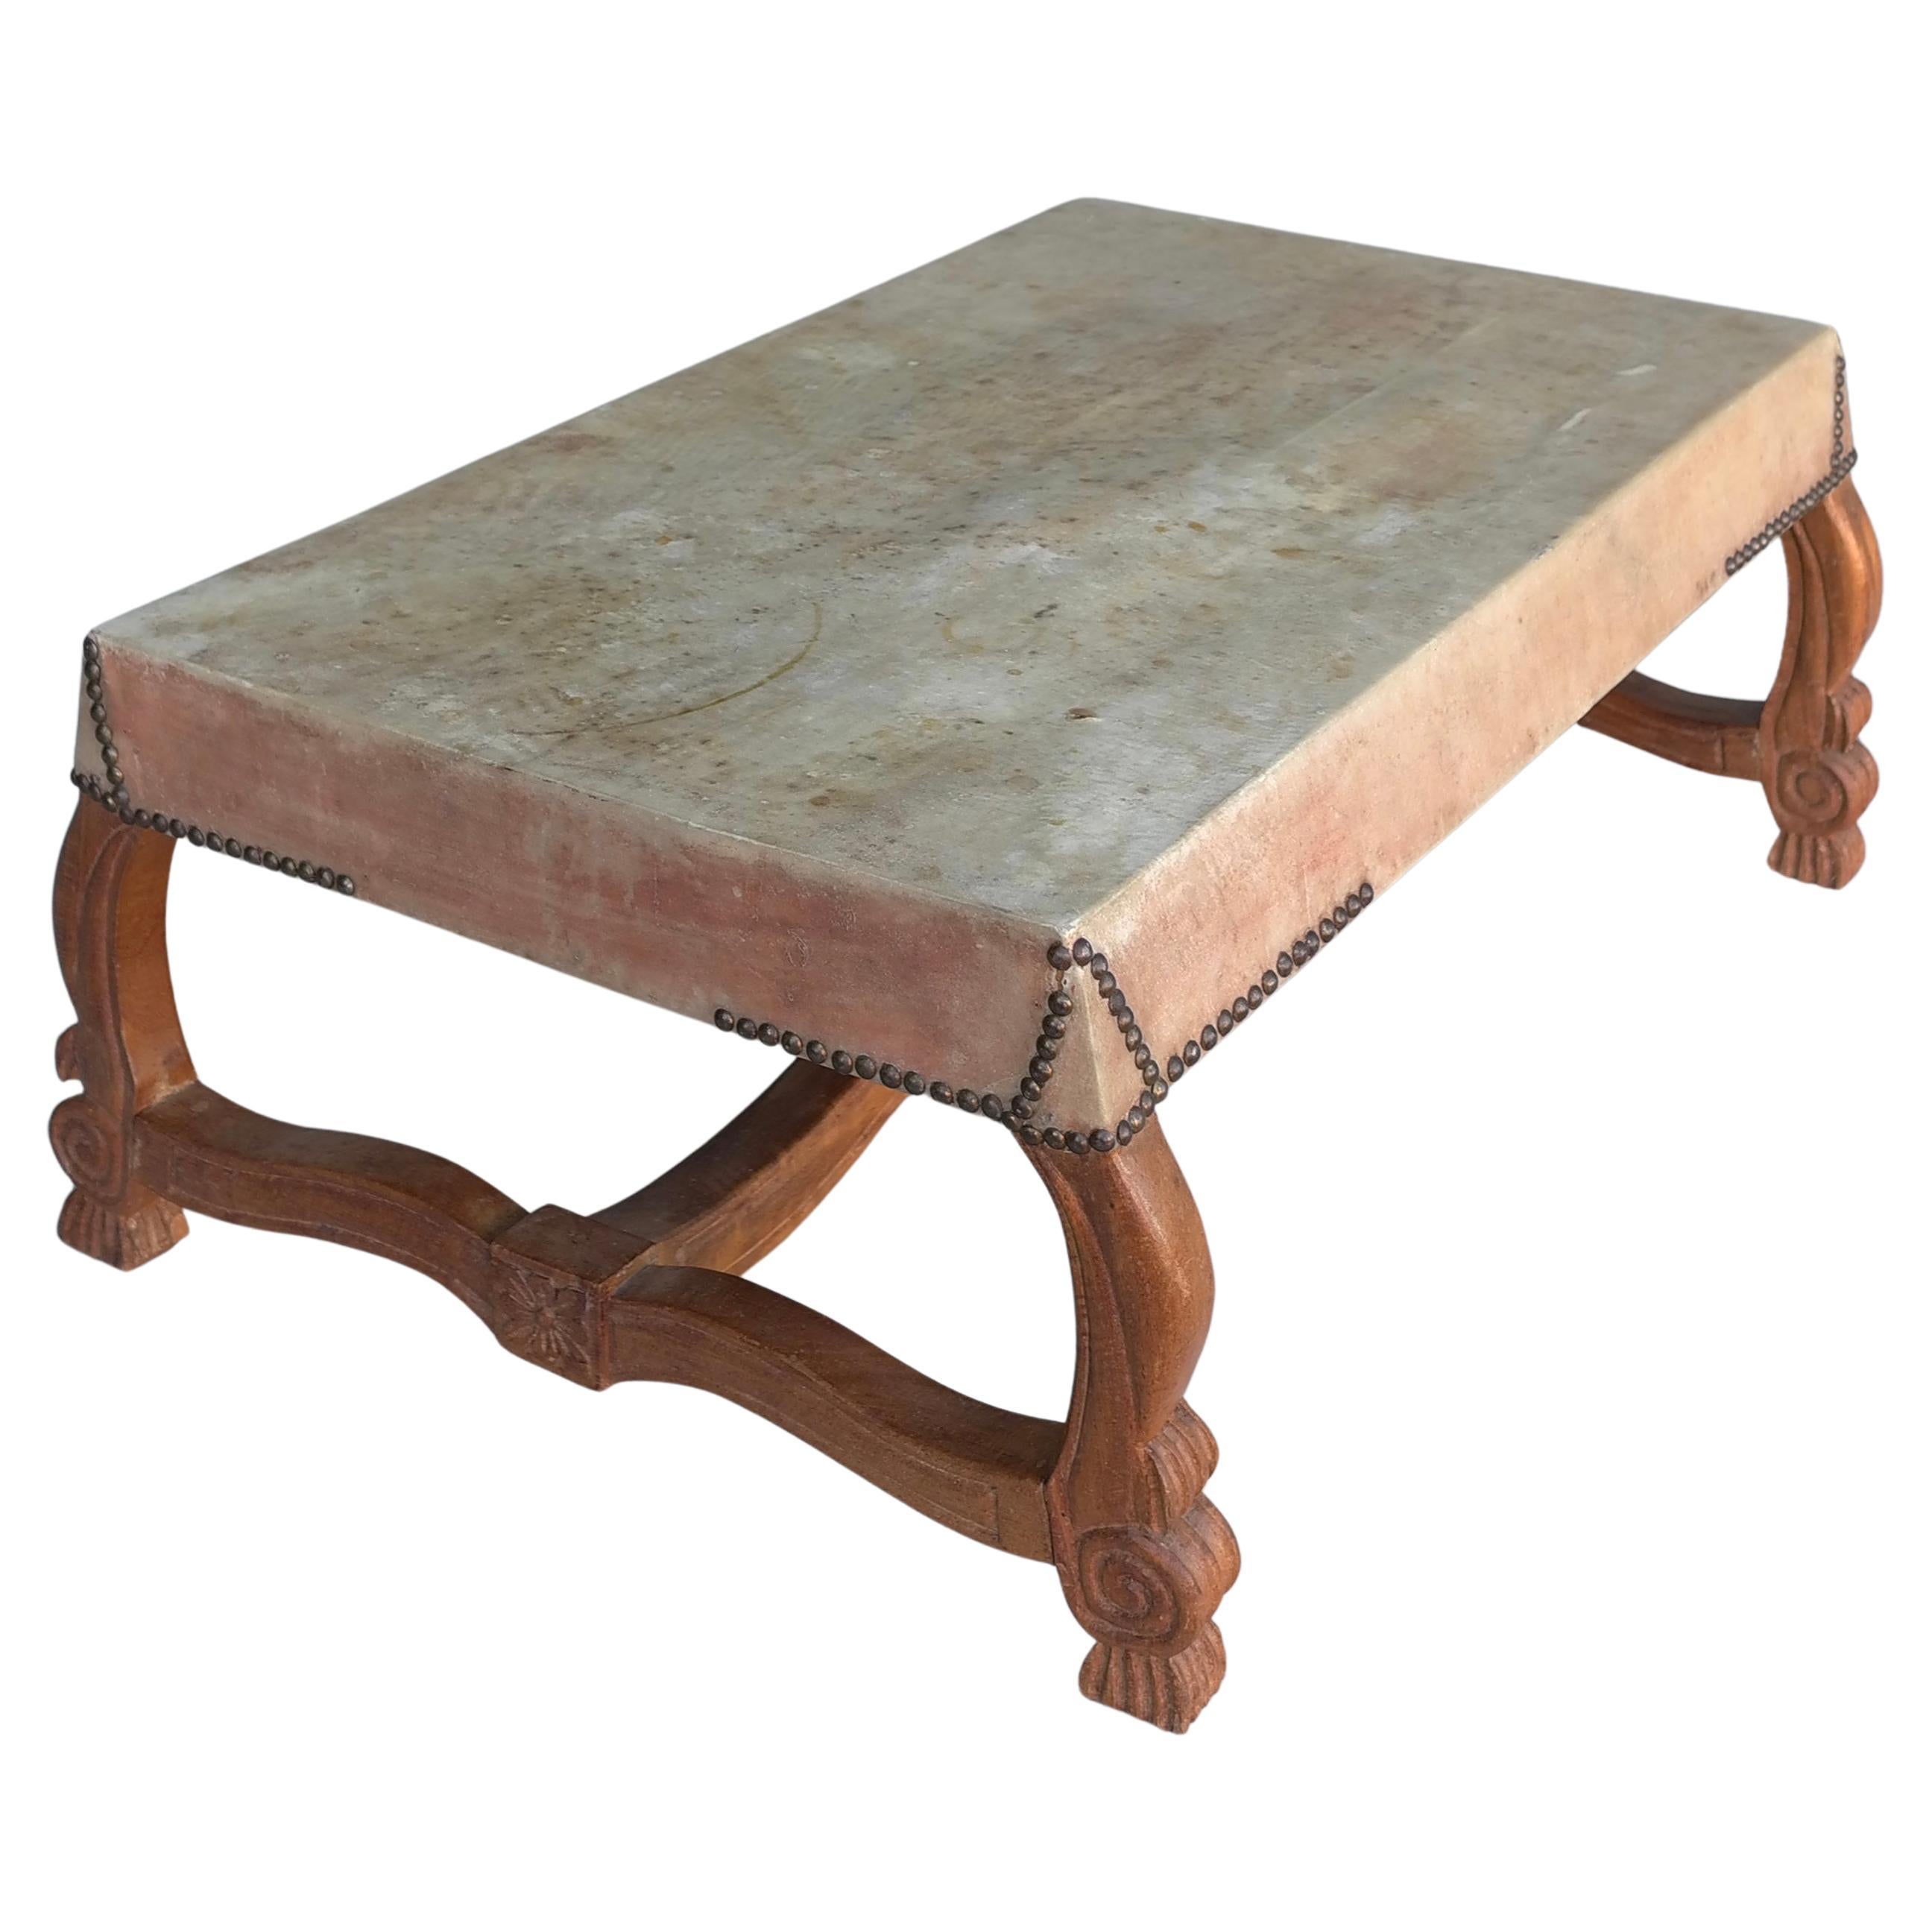 Neoclassic Mid-Century Modern Wooden Table with Goatskin top, Italy 1960's For Sale